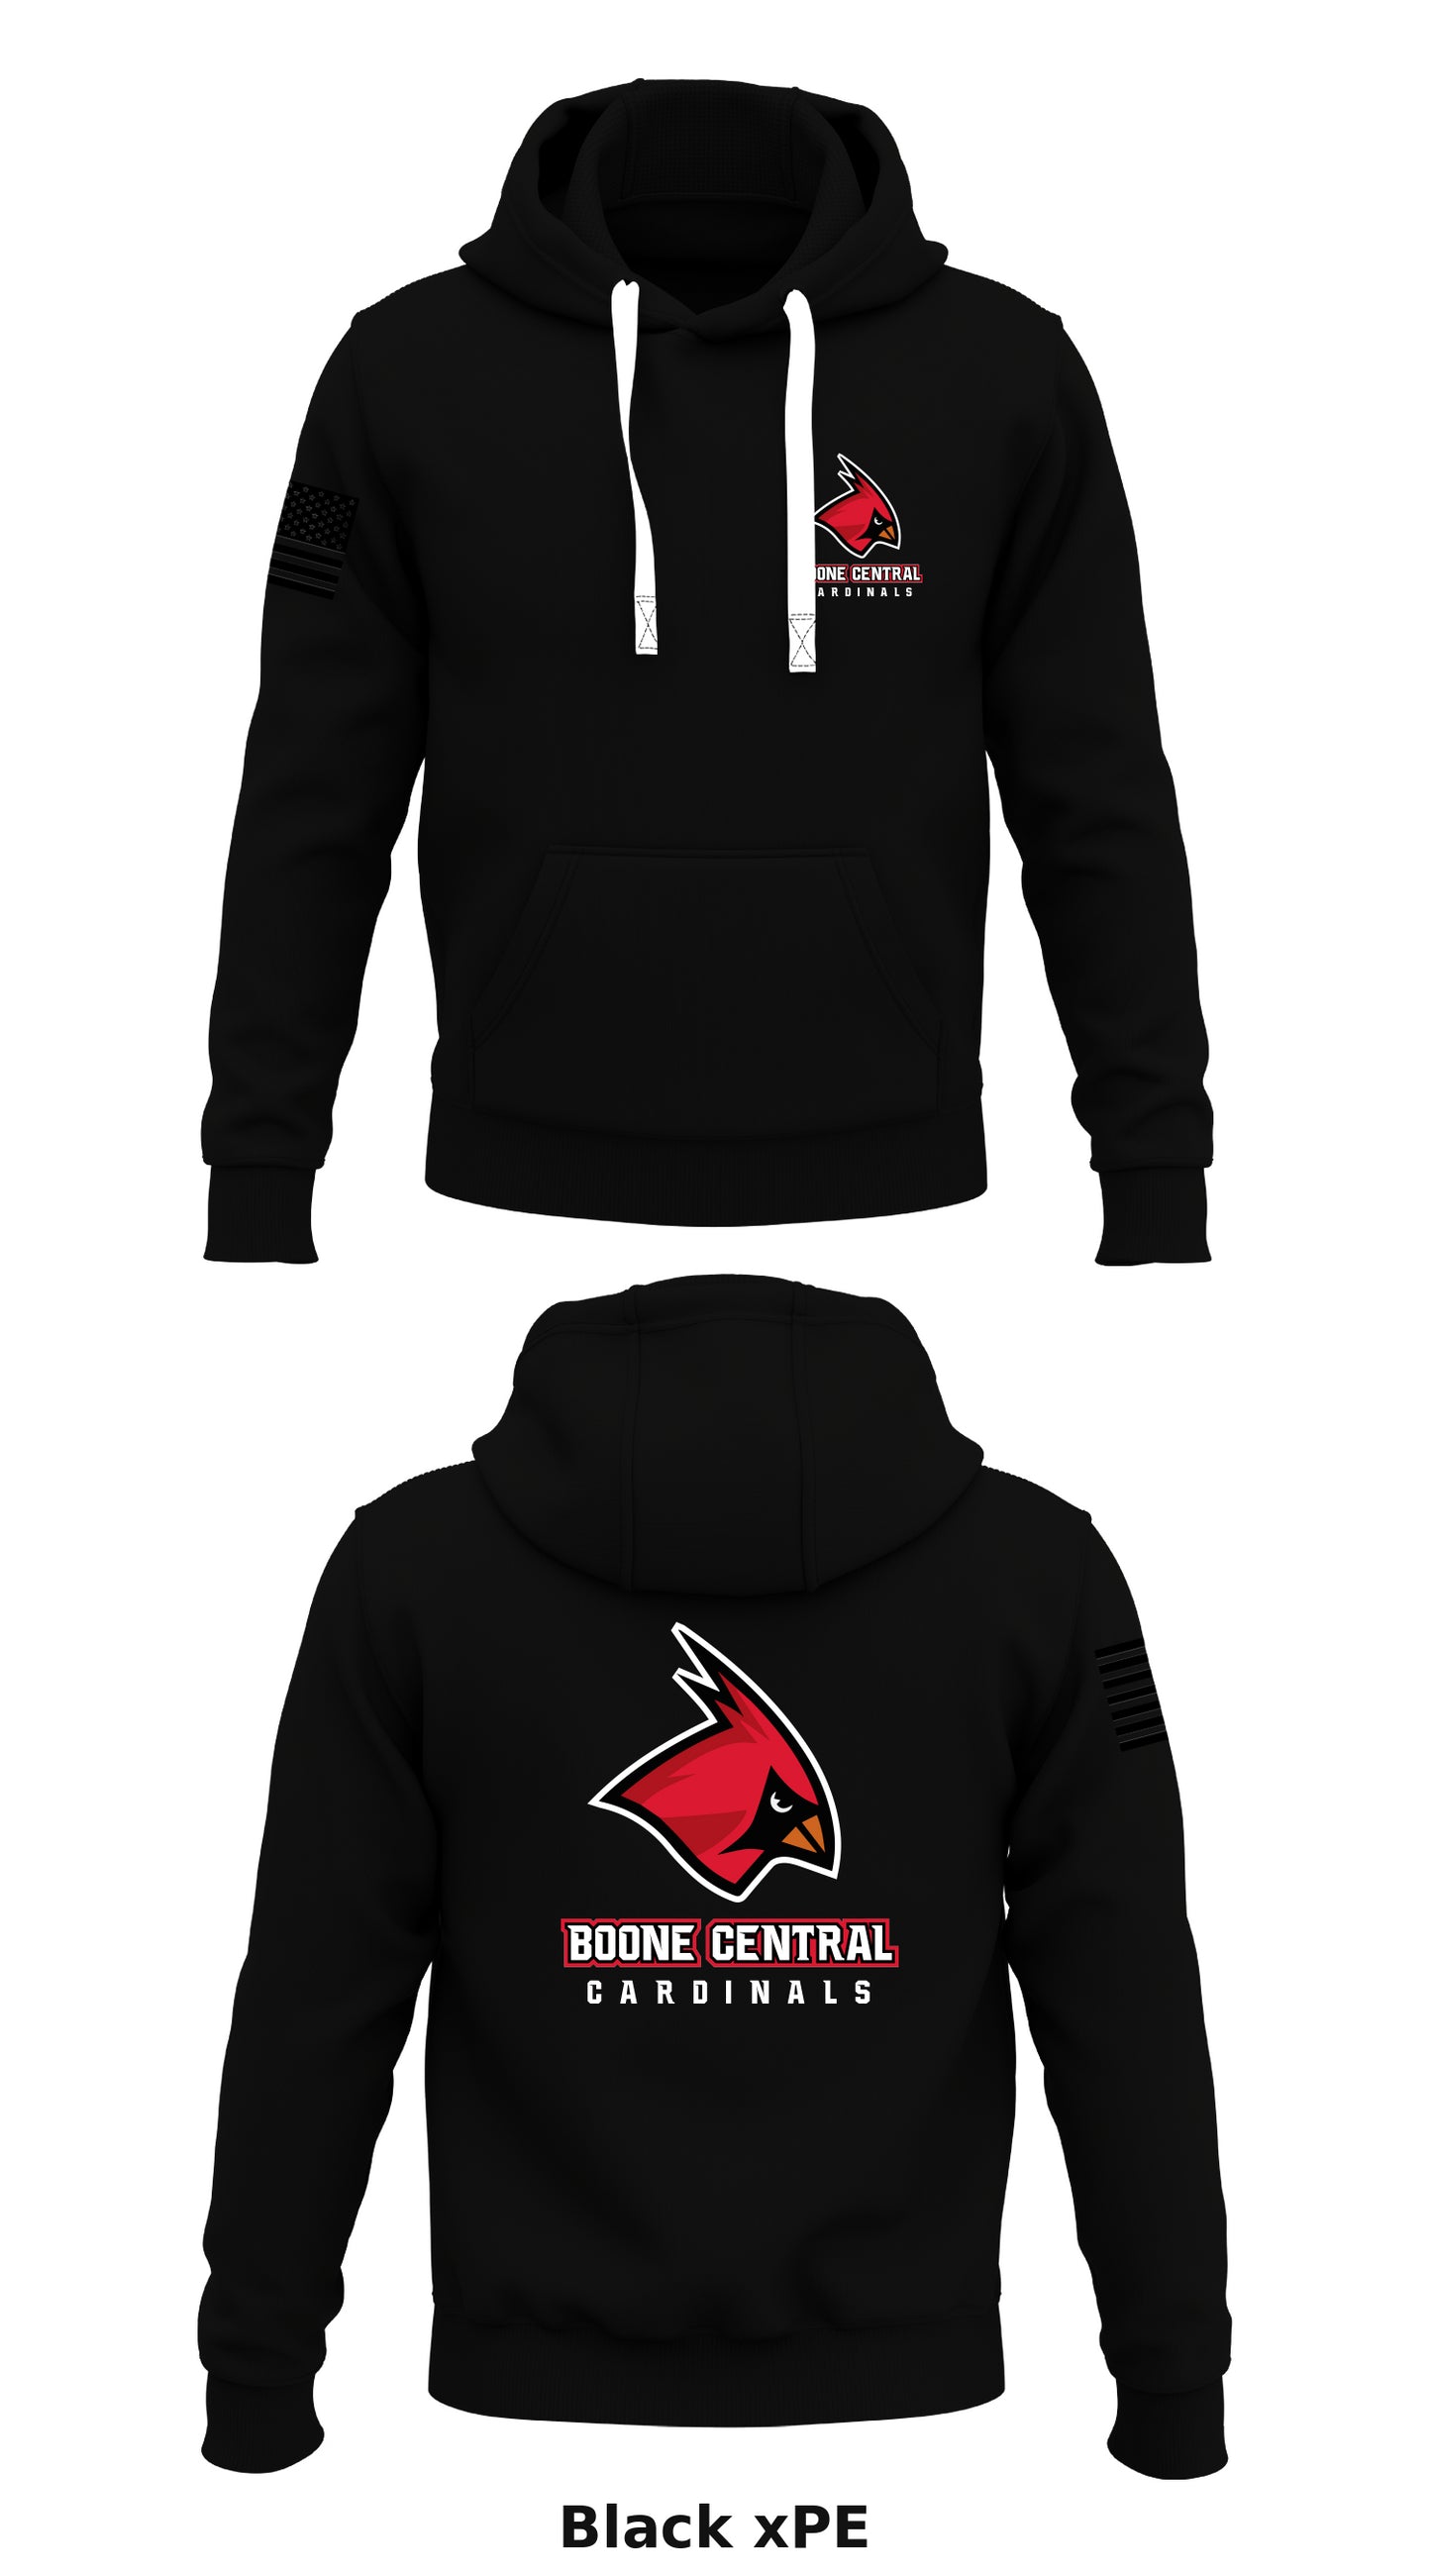 Boone Central Cardinals Store 1  Core Men's Hooded Performance Sweatshirt - xPE